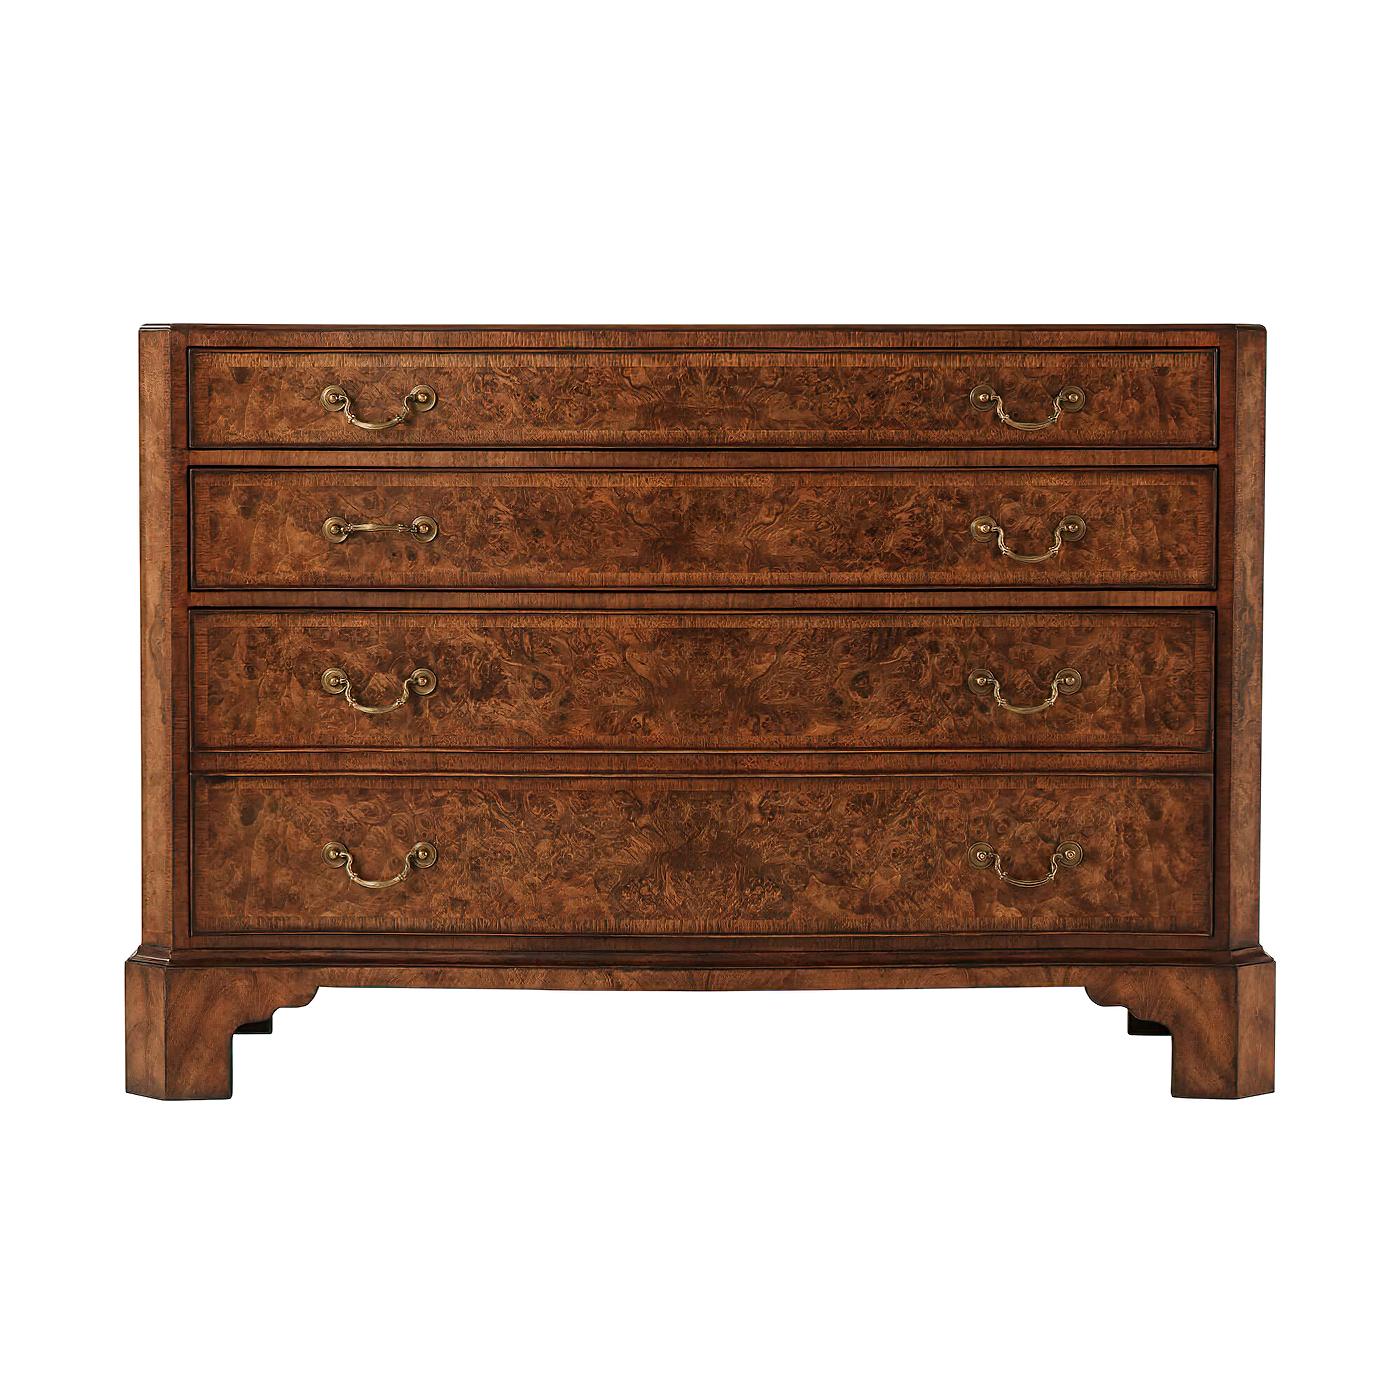 A Chippendale style serpentine form English dresser with walnut burl veneers and walnut banding, the serpentine and molded top centered by a burl oval, above three shaped and graduated drawers with cast brass handle, on bracket feet.
Dimensions: